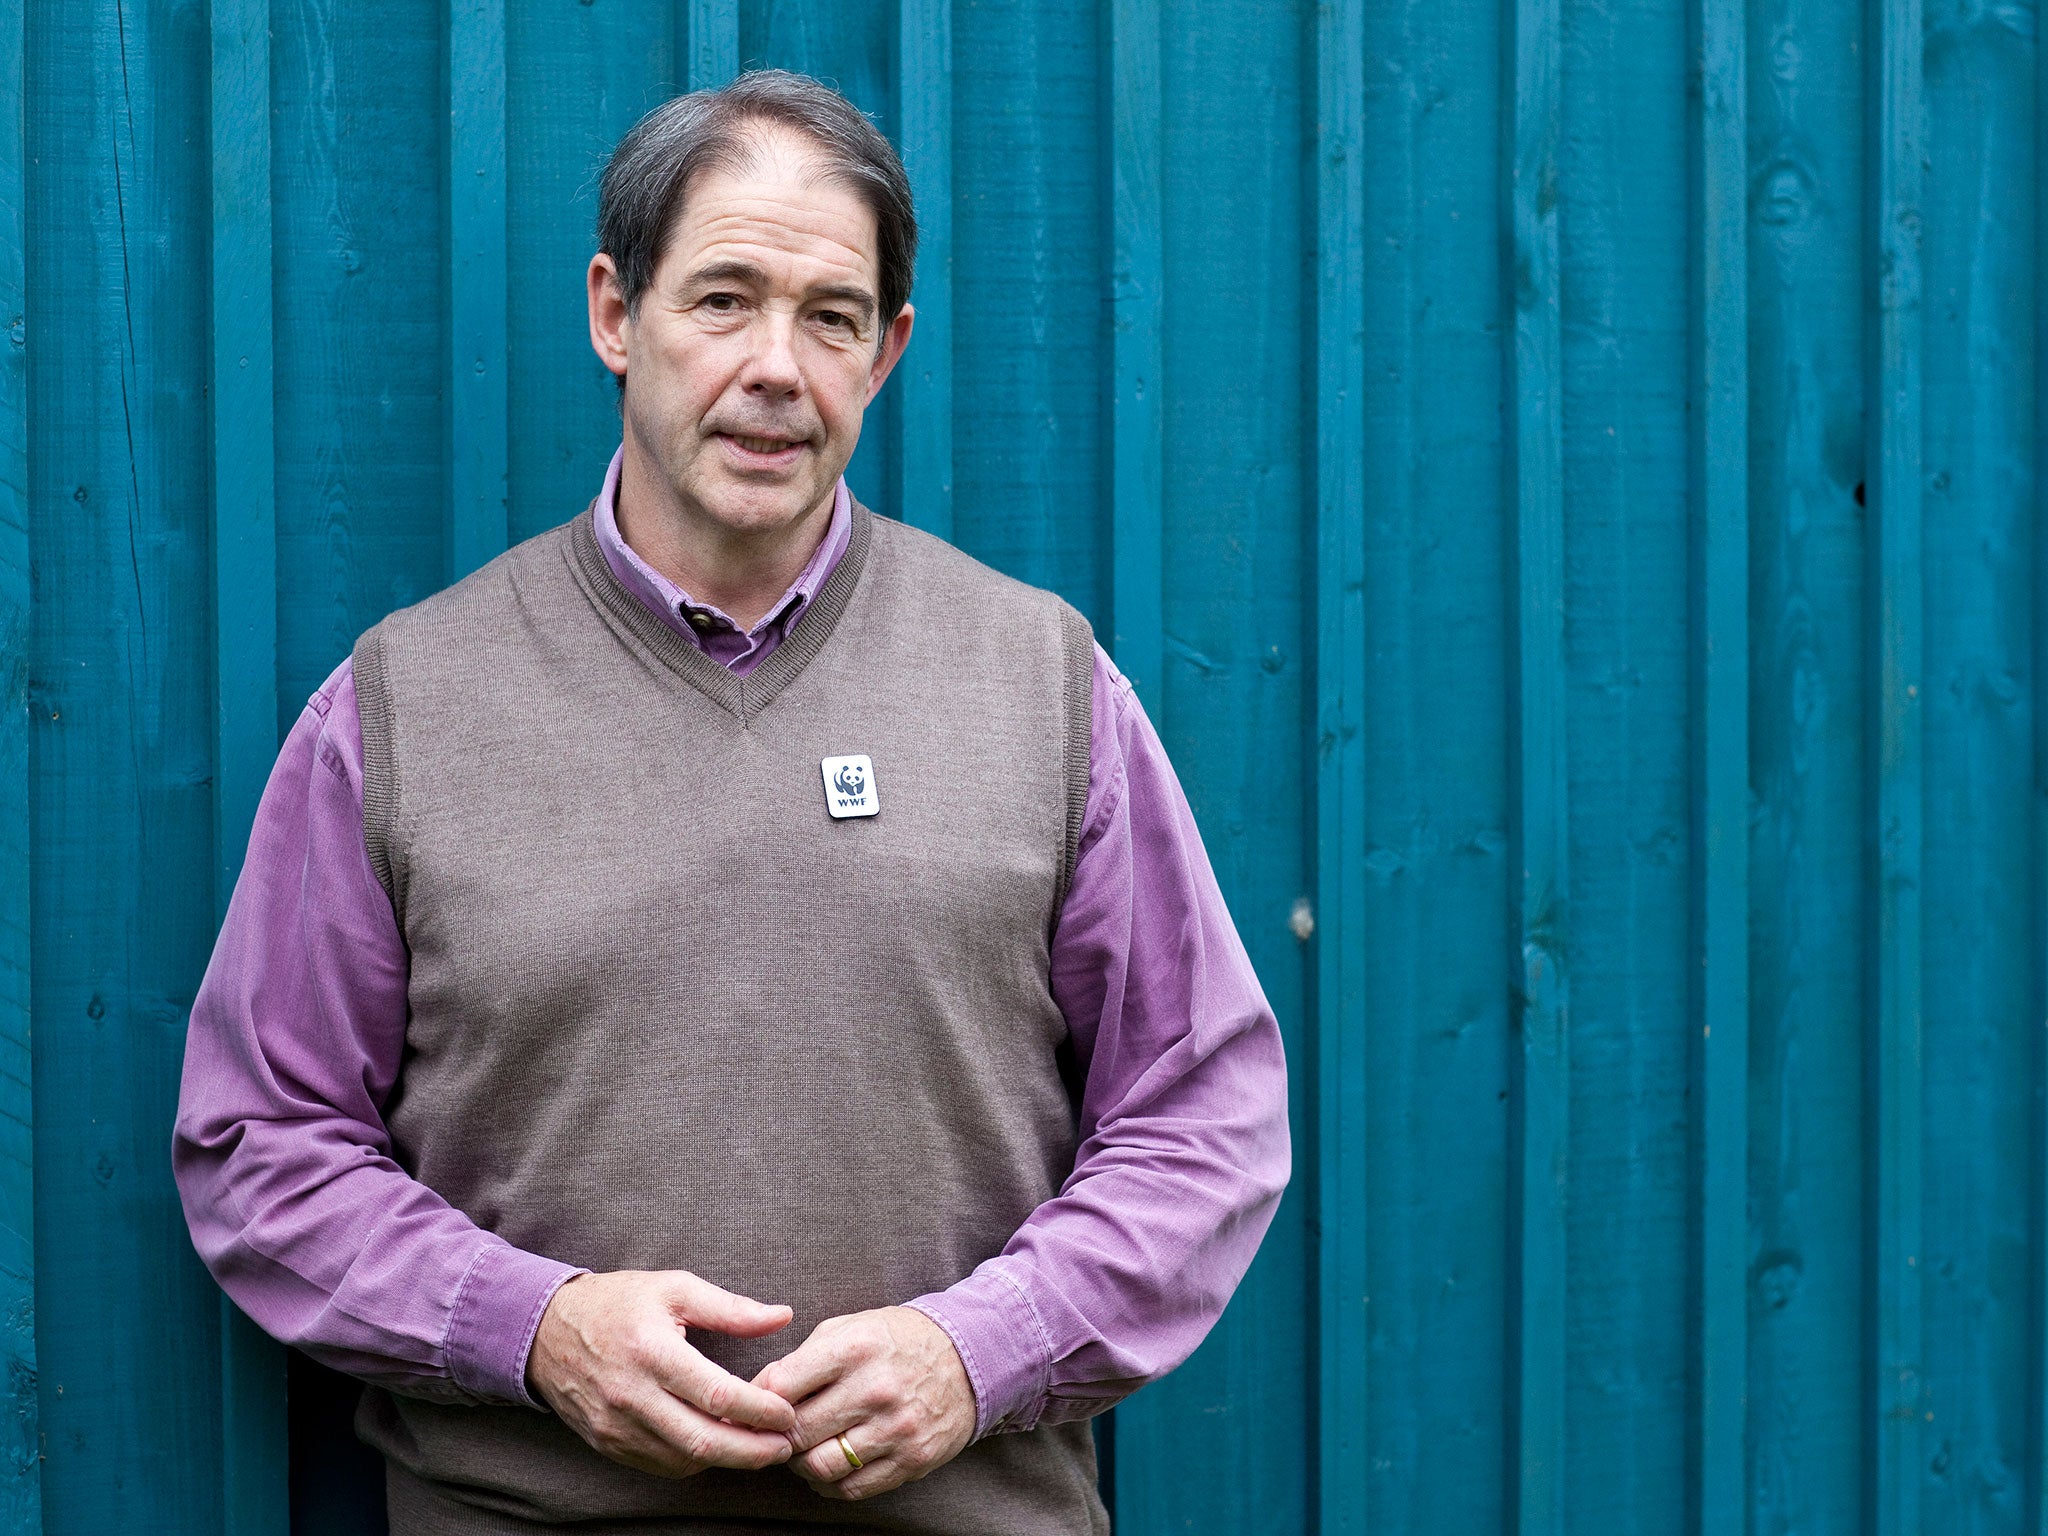 Sir Jonathon Porritt is encouraged by pledges from more than 160 nations to cut carbon emissions by 2030